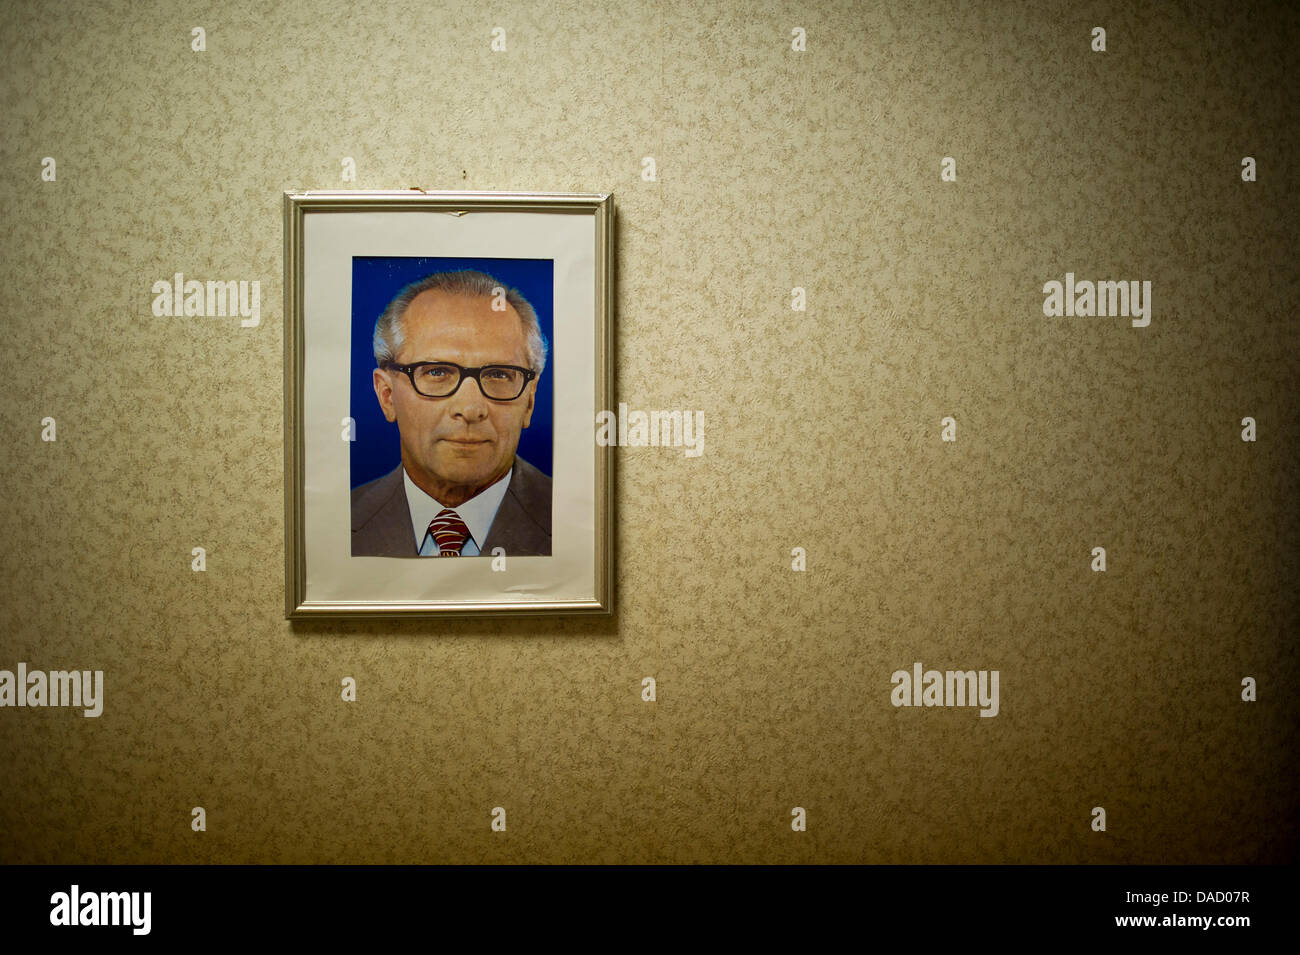 A view of the interrogation room with a picture of Erich Honecker, former head of the  Socialist Unity Party of East Germany, on display in the former remand center at the regional office of the East German Ministry for State Security, also known as Stasi, in Dresden, Germany, 5 December 2011. The former remand center serves now as a Stasi memorial place. The sponsoring organisatio Stock Photo